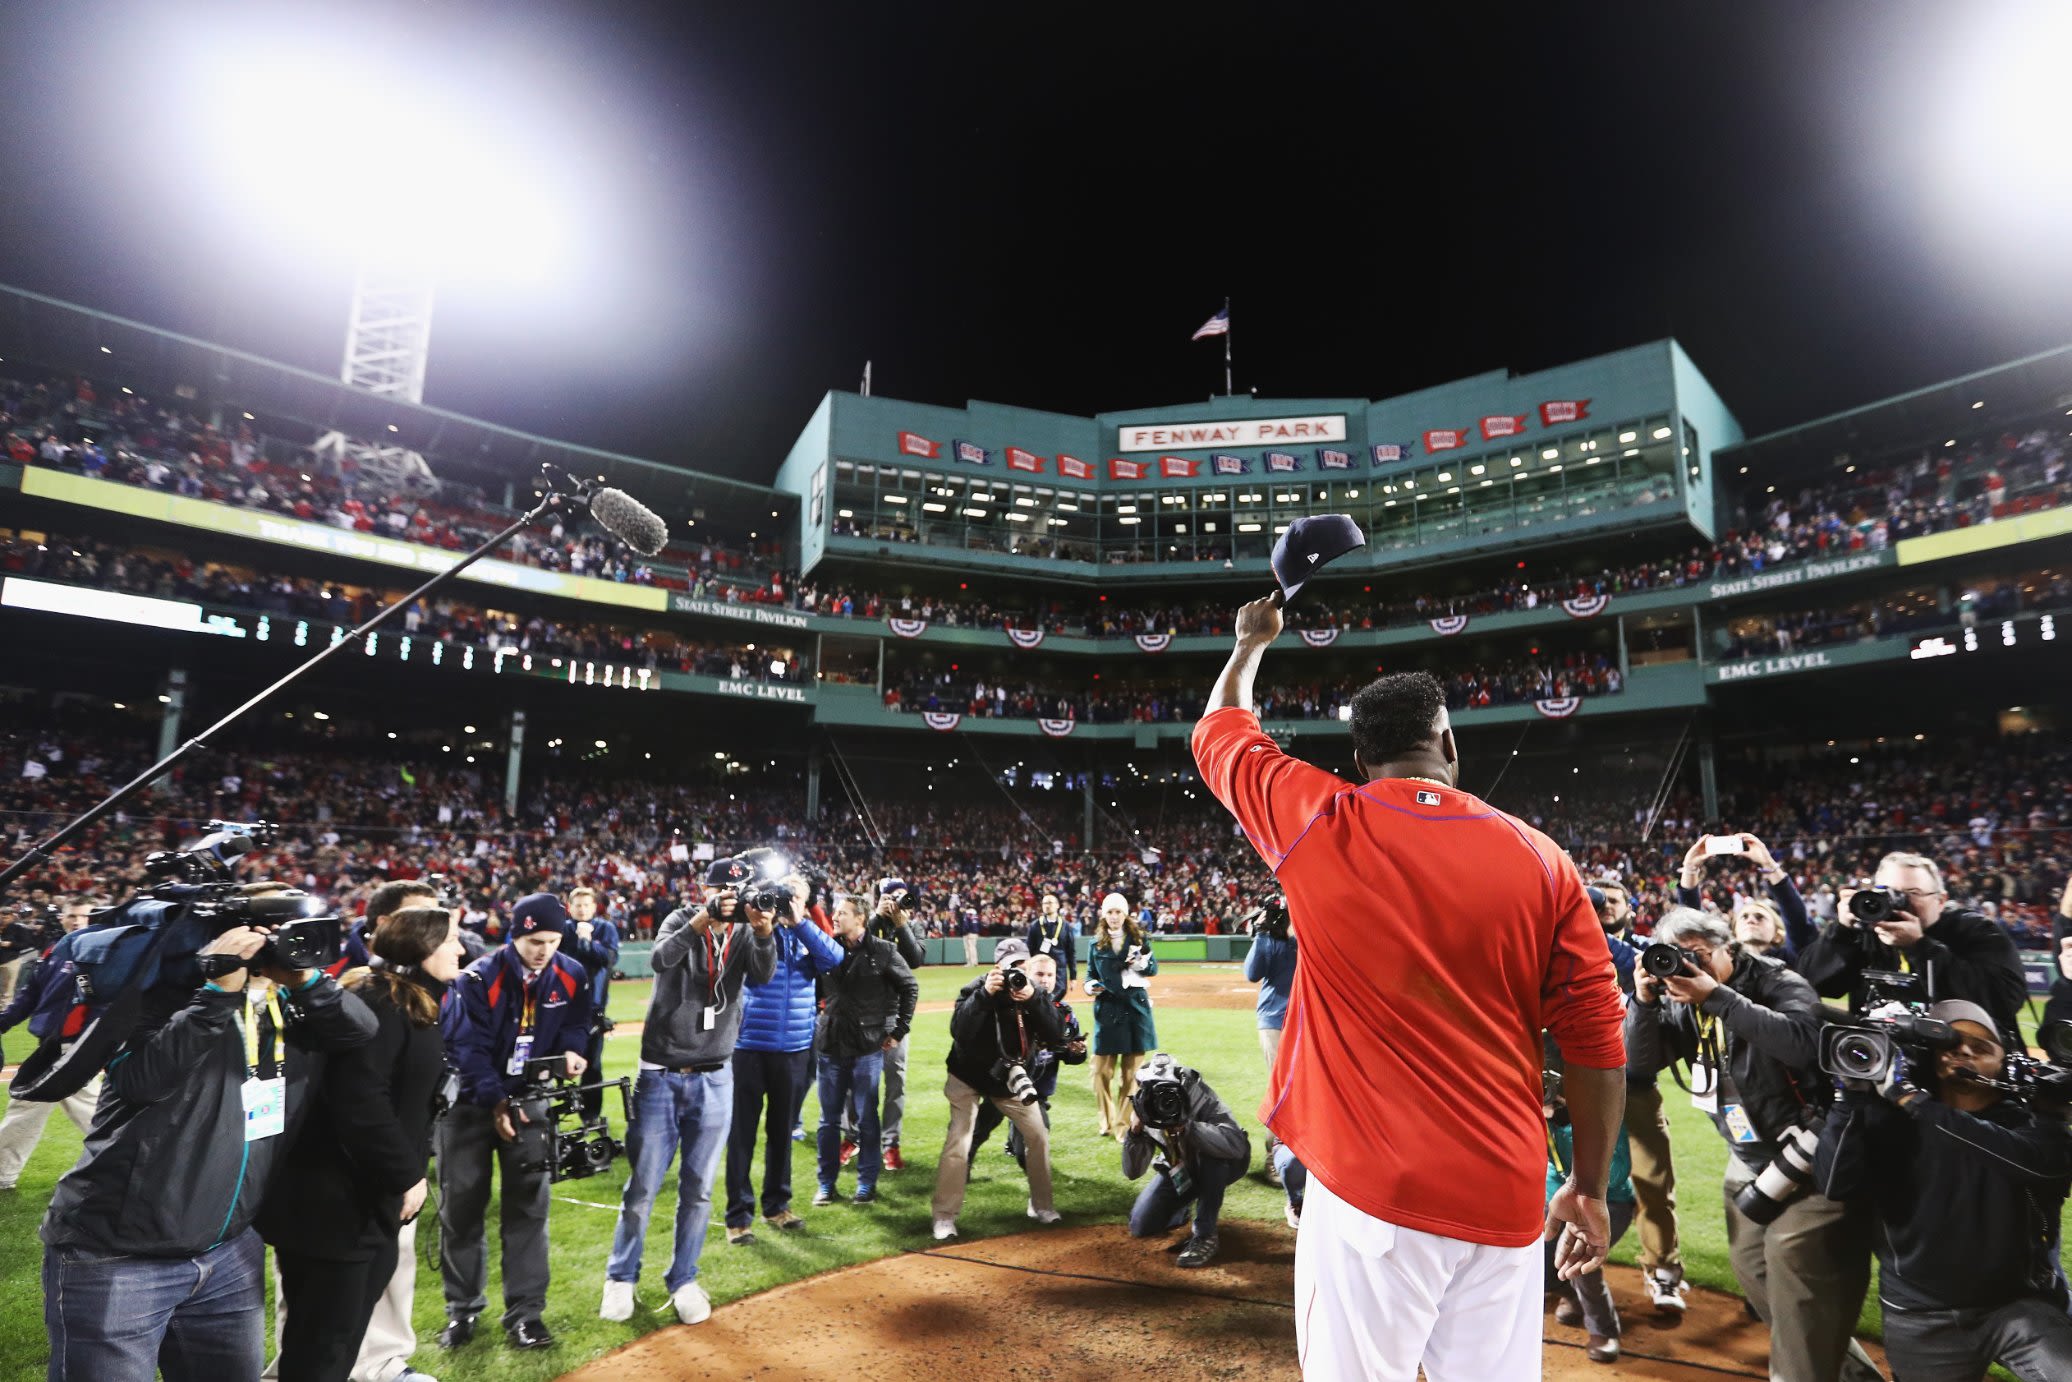 How the Red Sox stadium revamp changed the face of Boston neighborhood